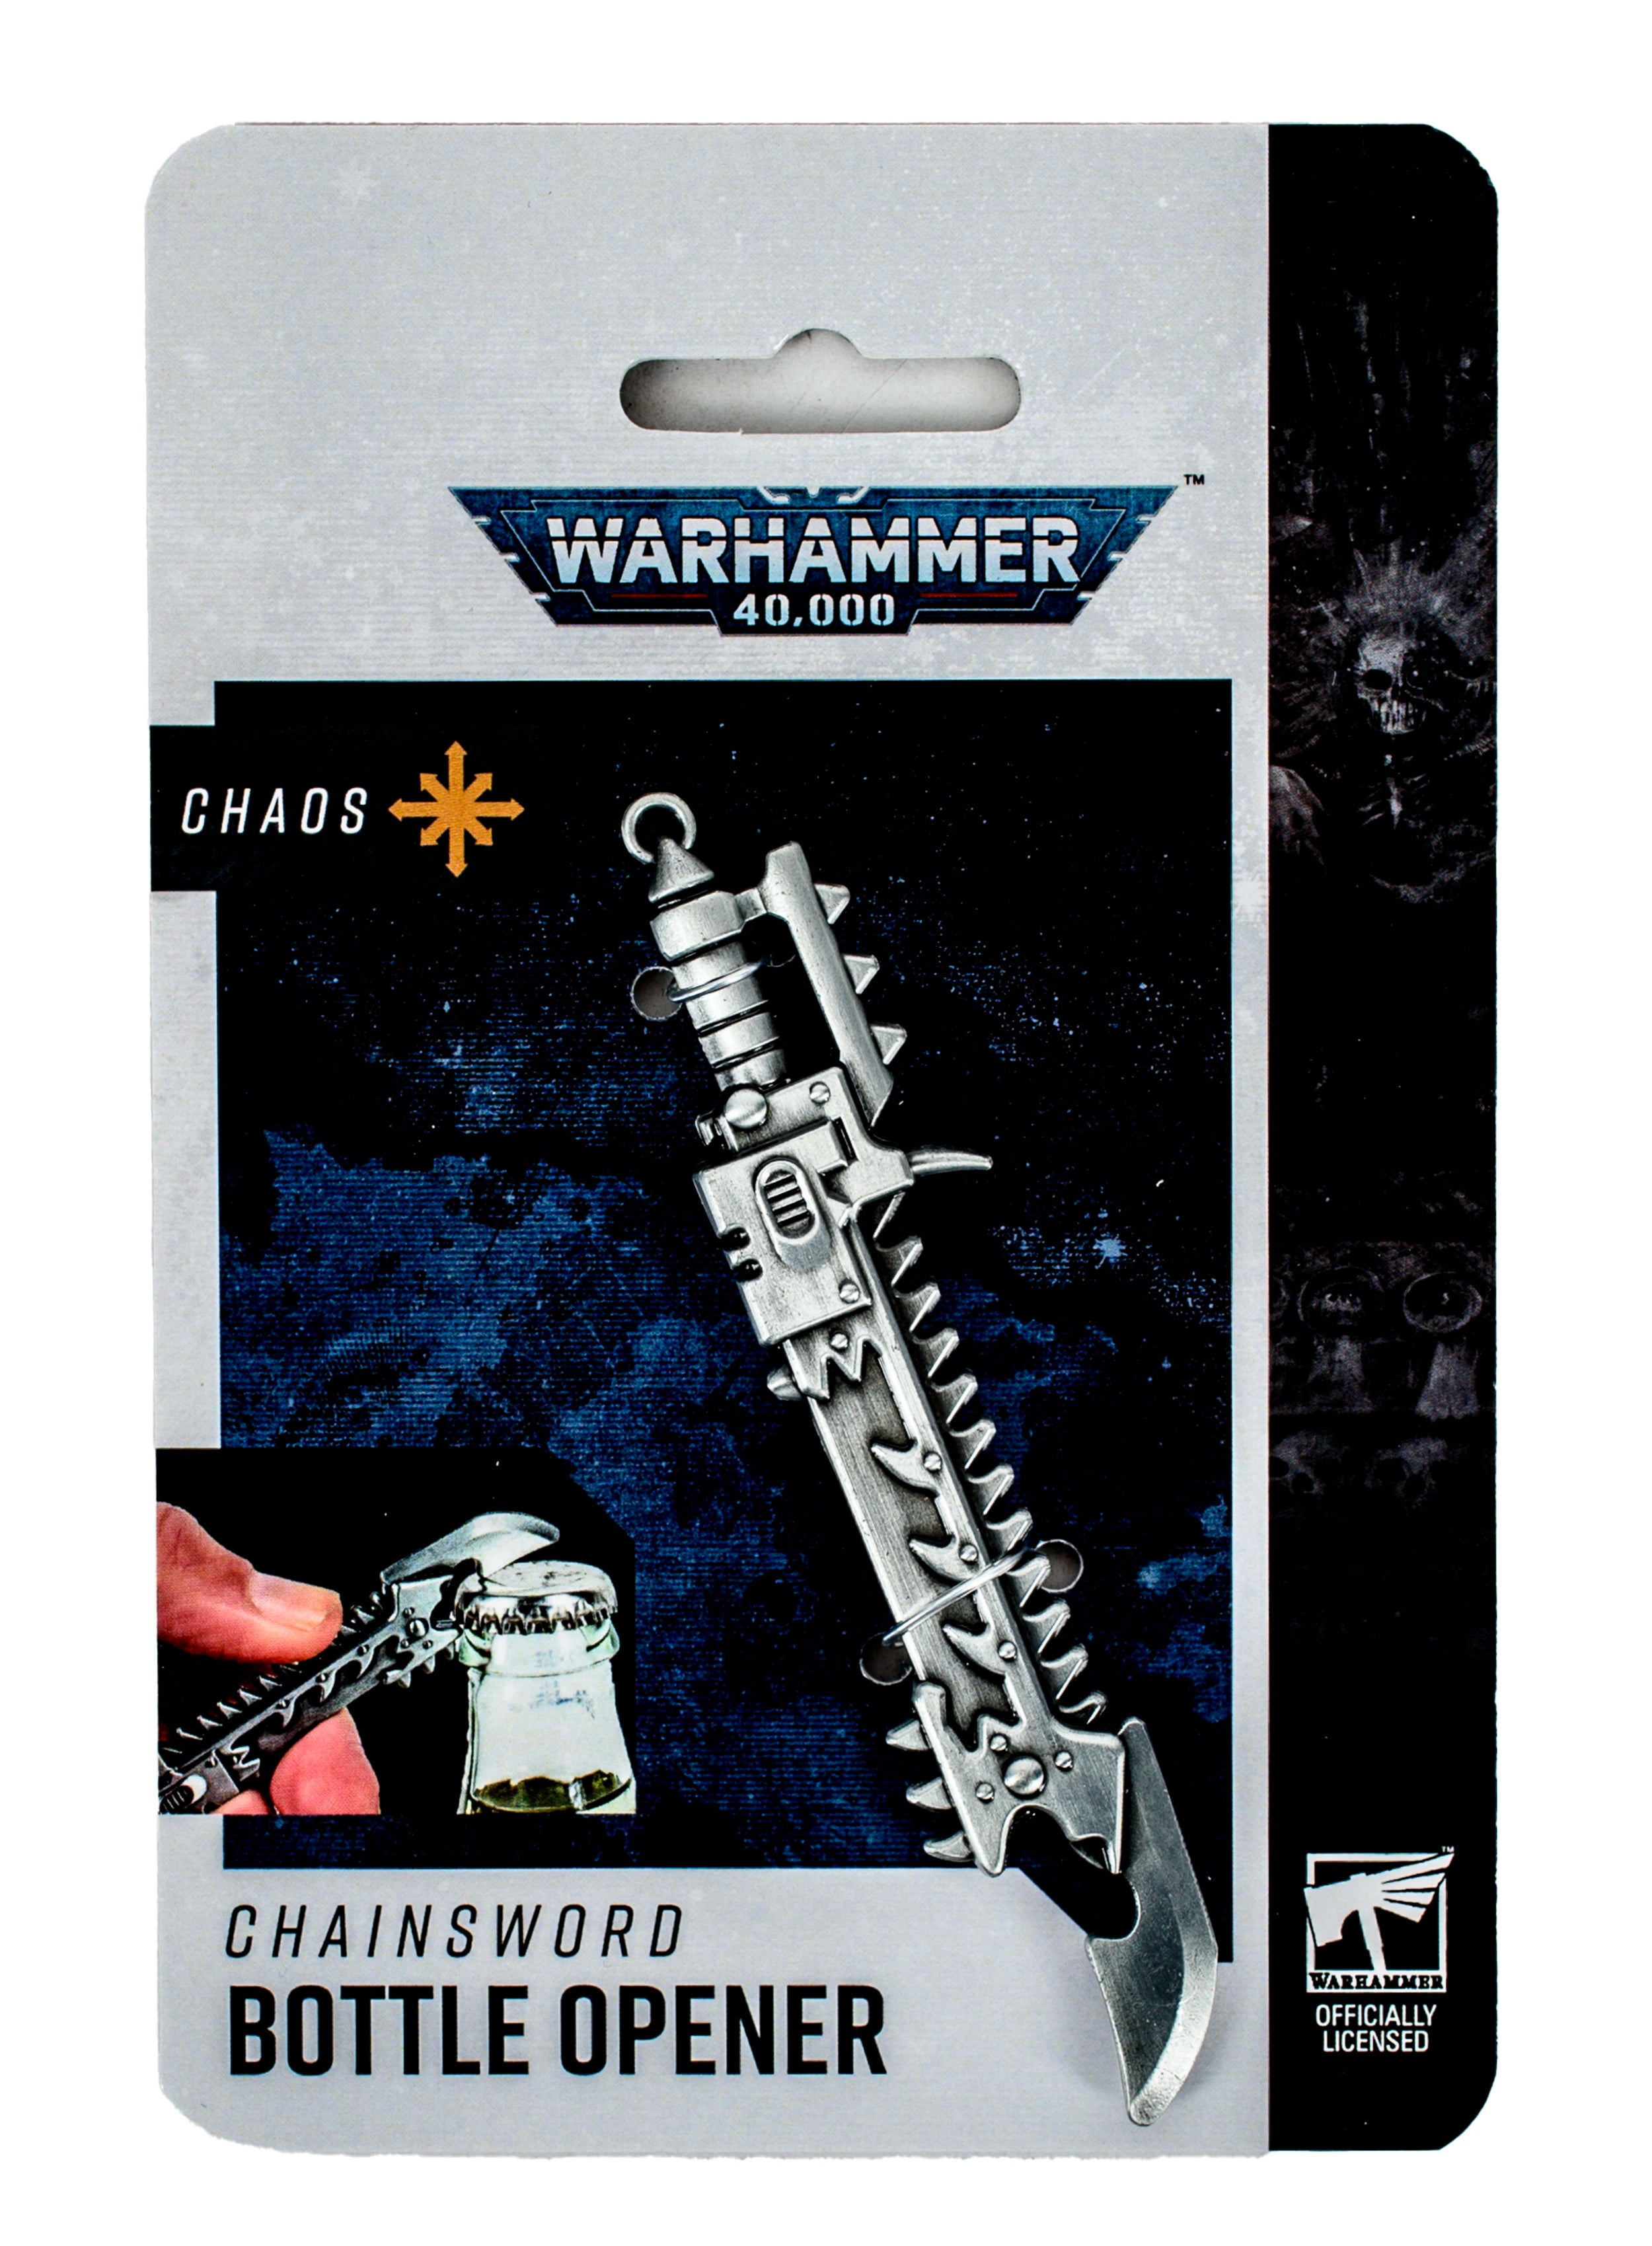 Warhammer 40,000: Chaos Chainsword Bottle Opener [PRE ORDER] - Loaded Dice